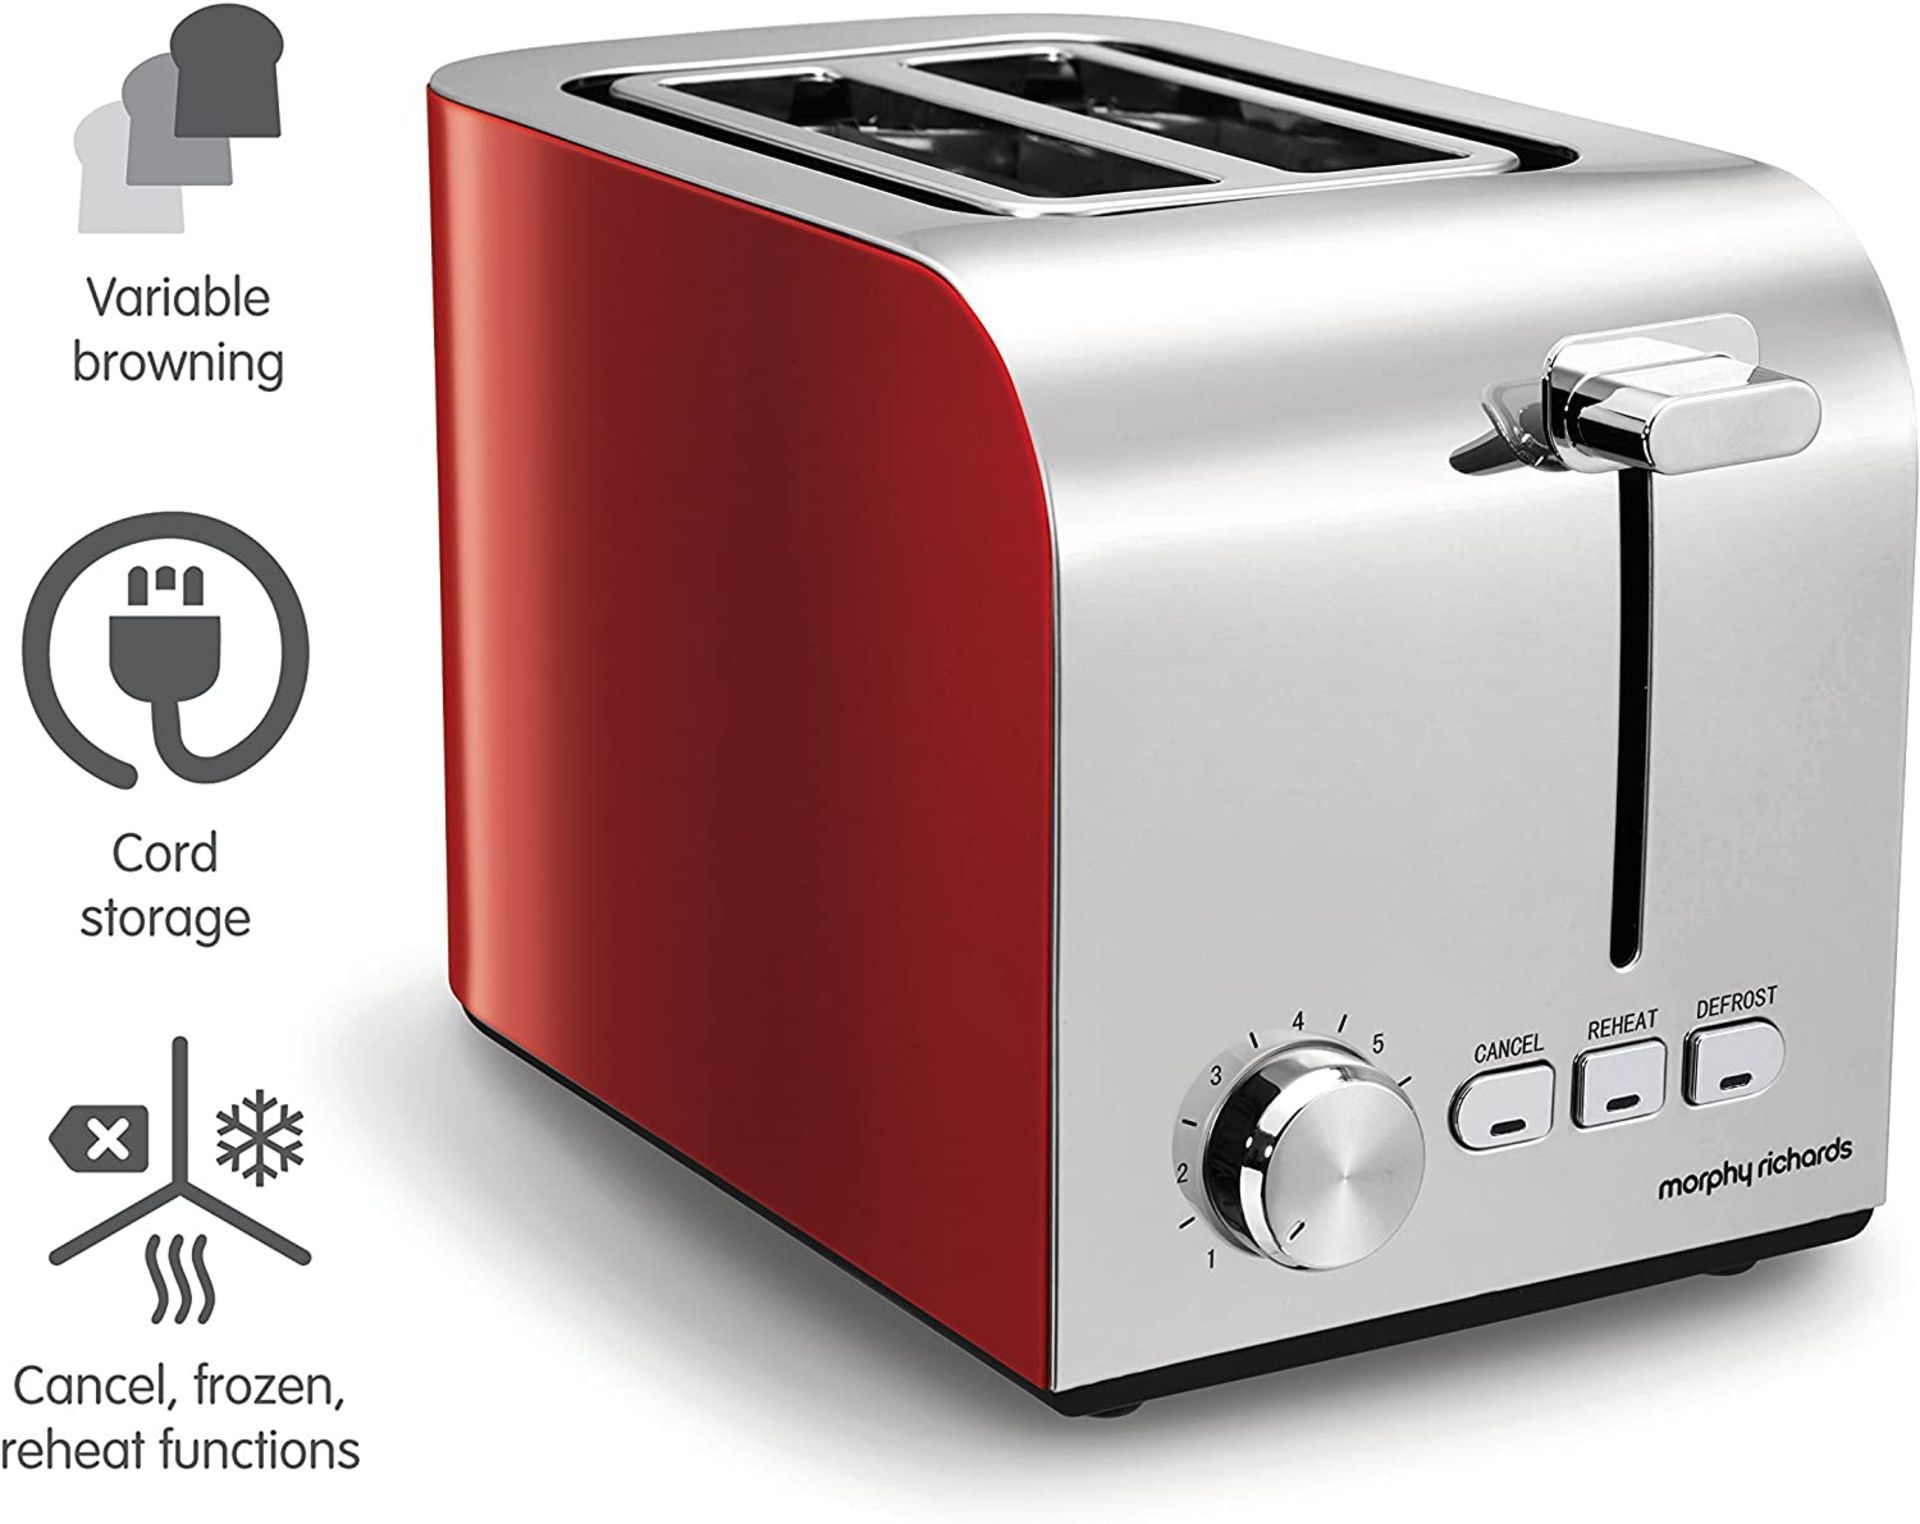 BRAND NEW MORPHY RICHARDS EQUIP RED 2 SLICE TOASTER